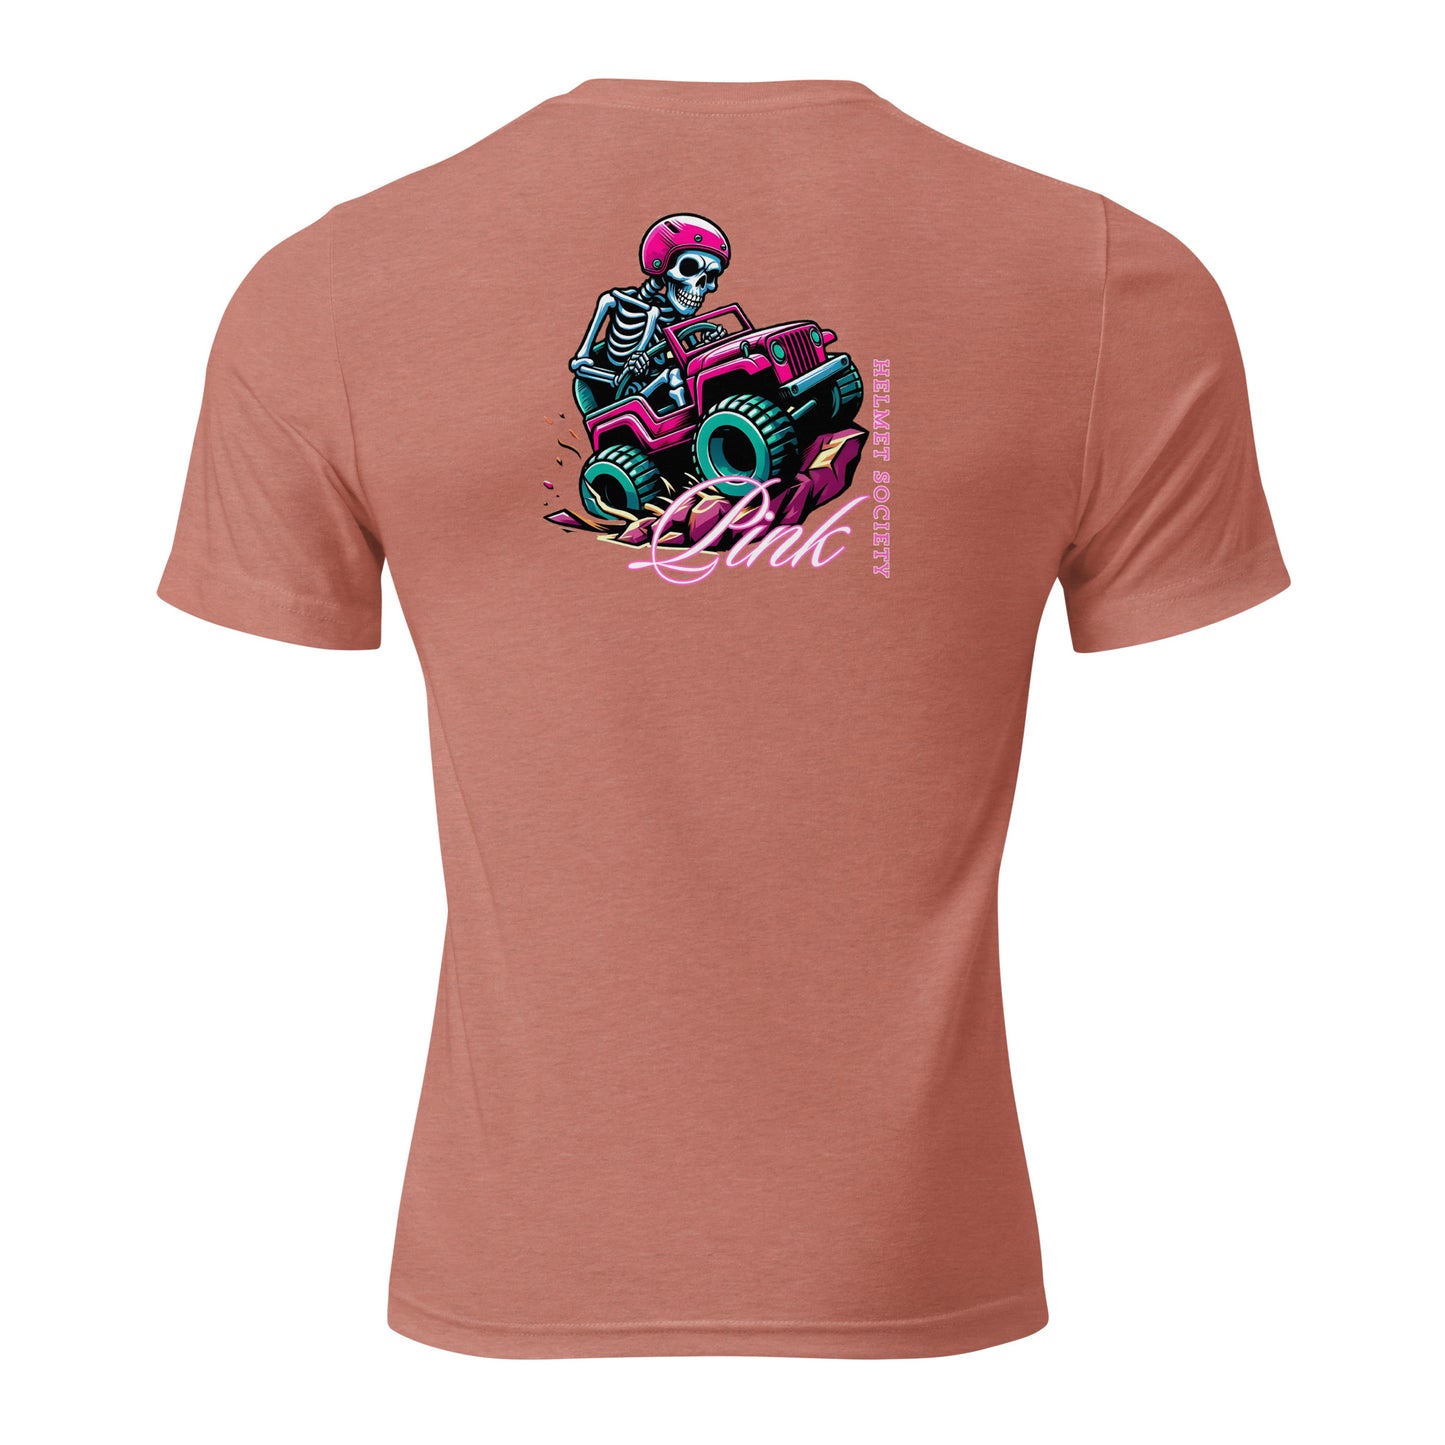 a pink shirt with a skeleton riding a motorcycle